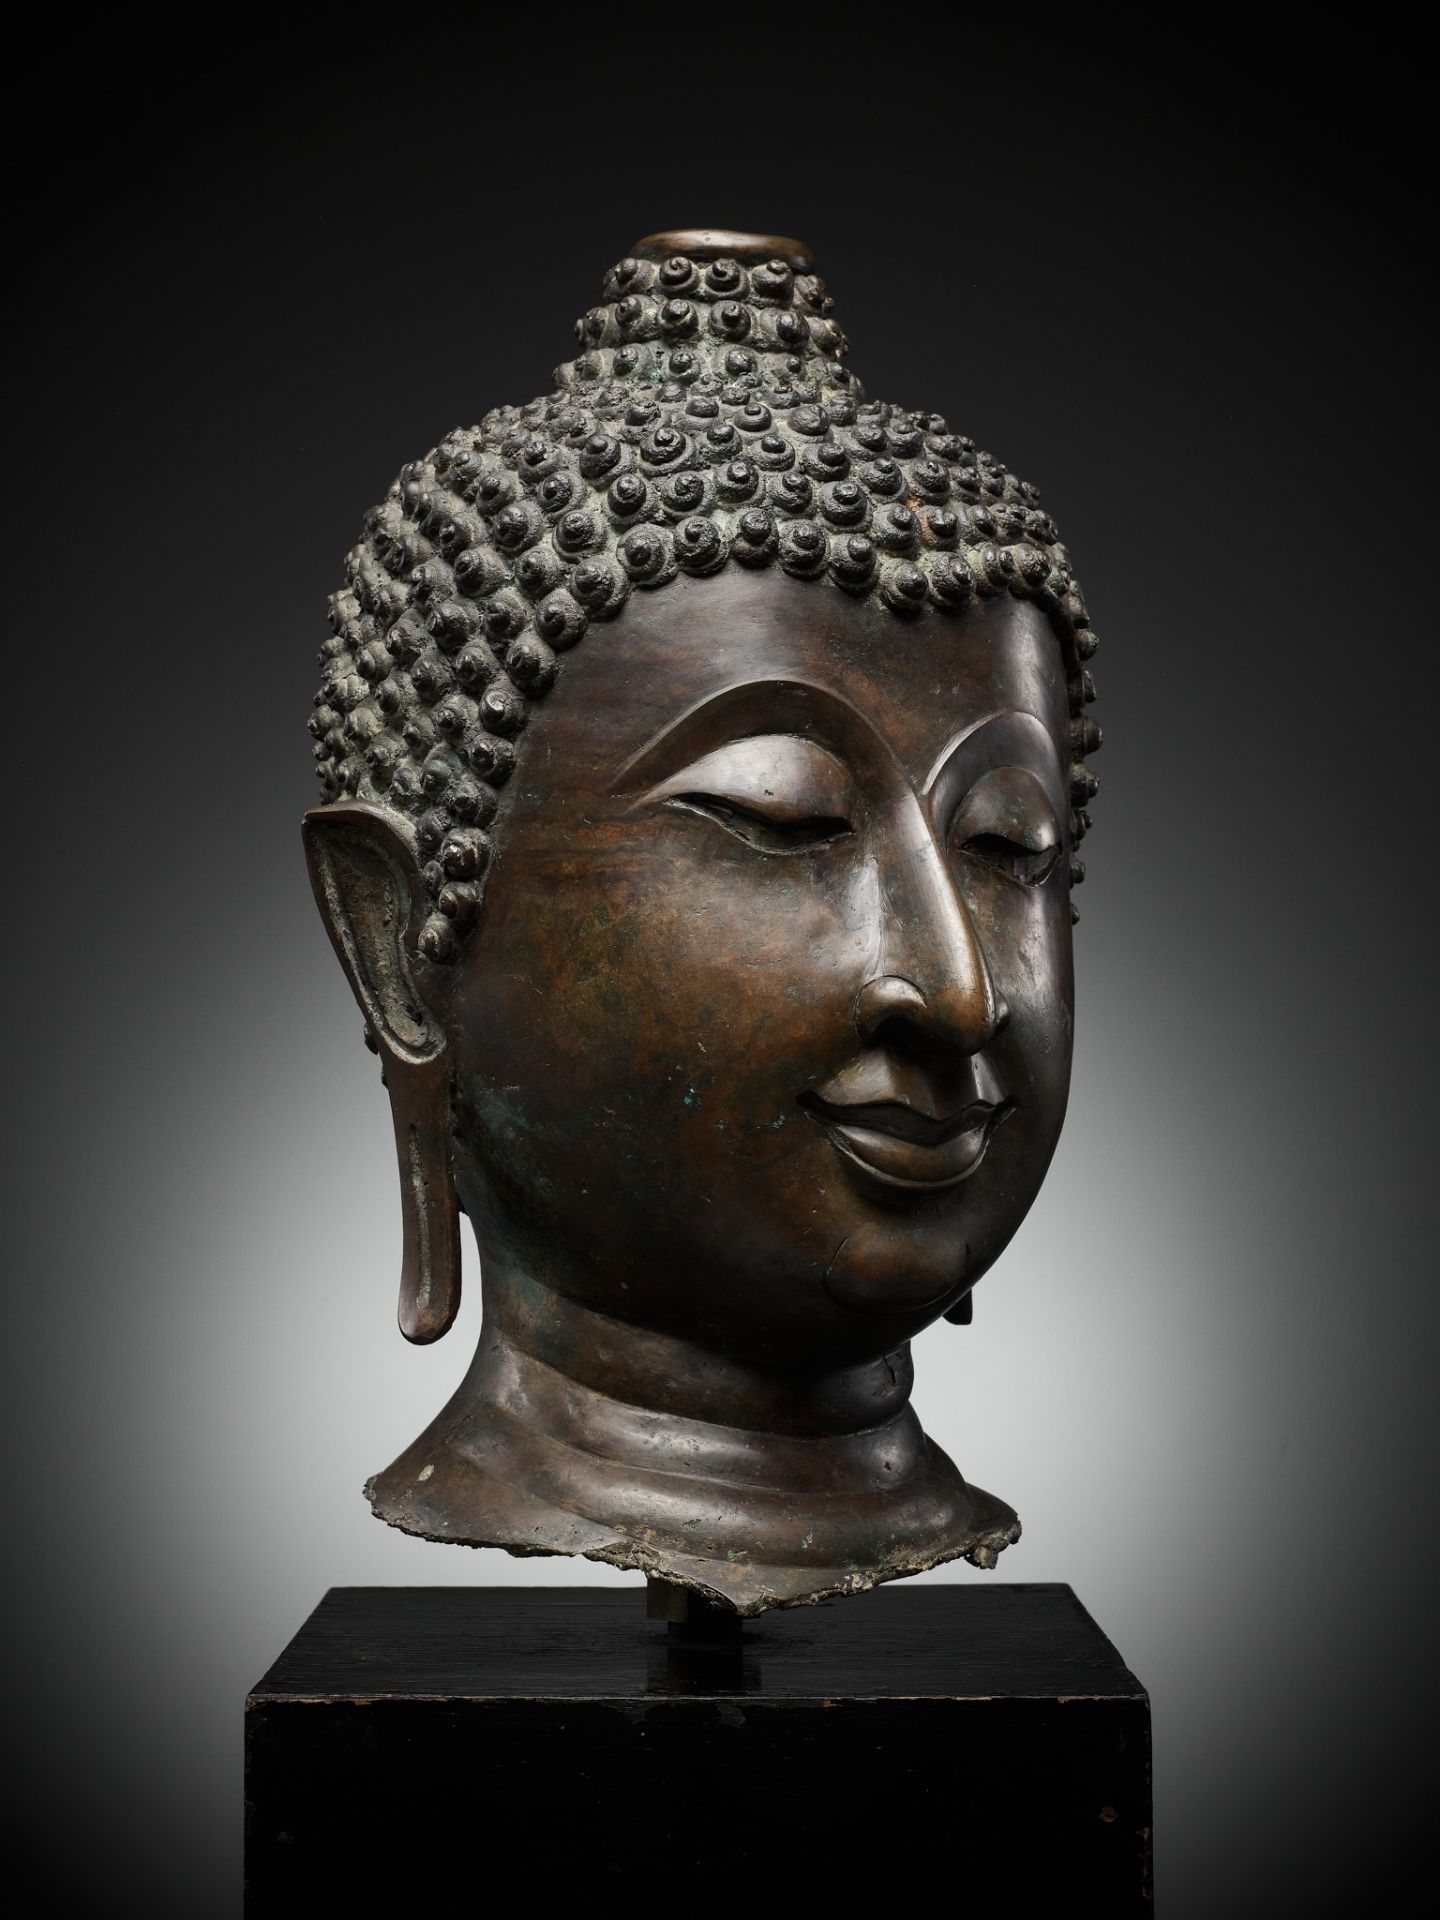 A MONUMENTAL BRONZE HEAD OF BUDDHA, LAN NA, NORTHERN THAILAND, 14TH-15th CENTURY - Image 7 of 16